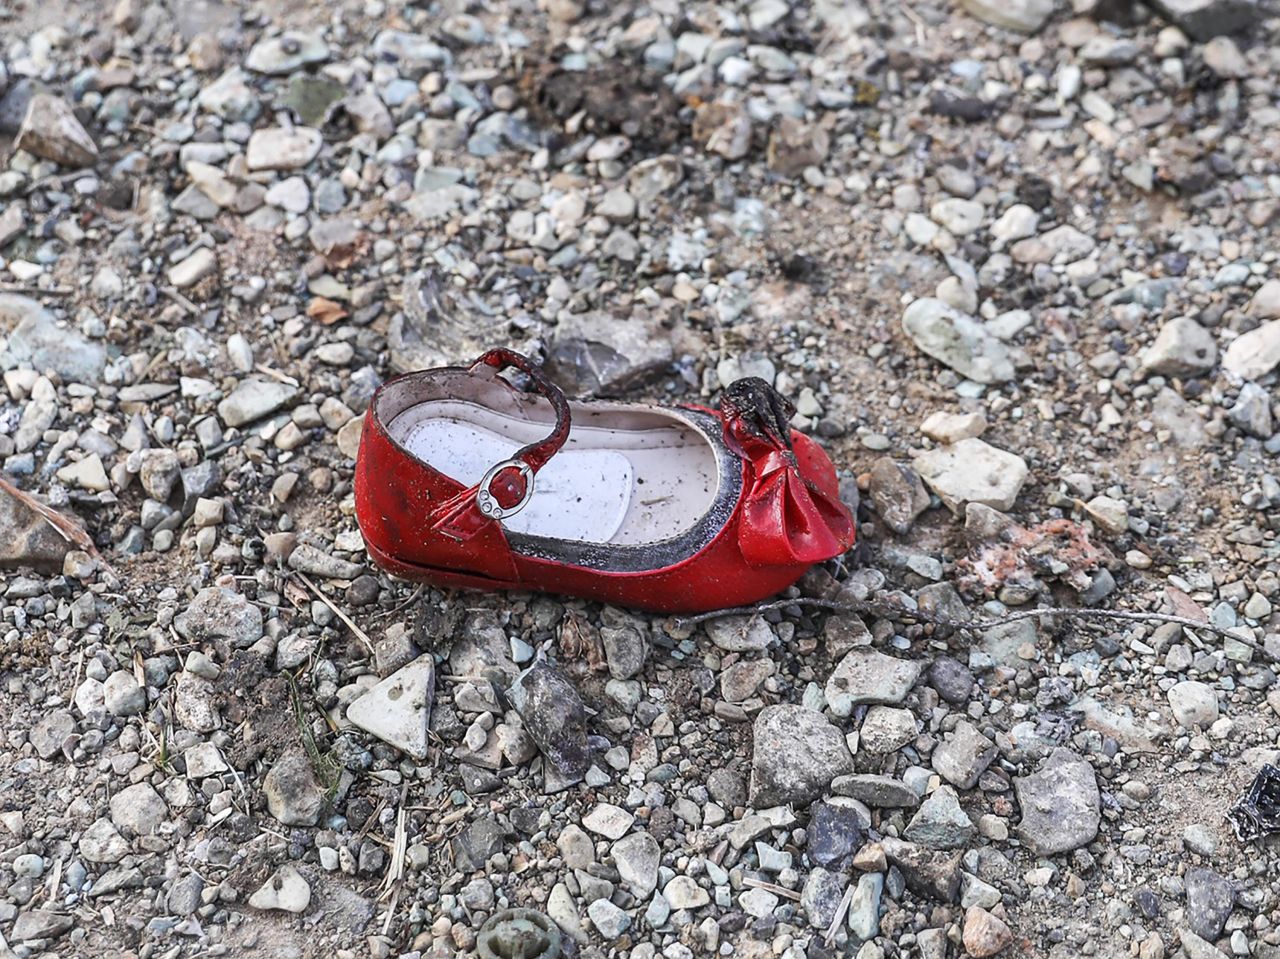 A child's shoe is pictured at the scene of the crash.